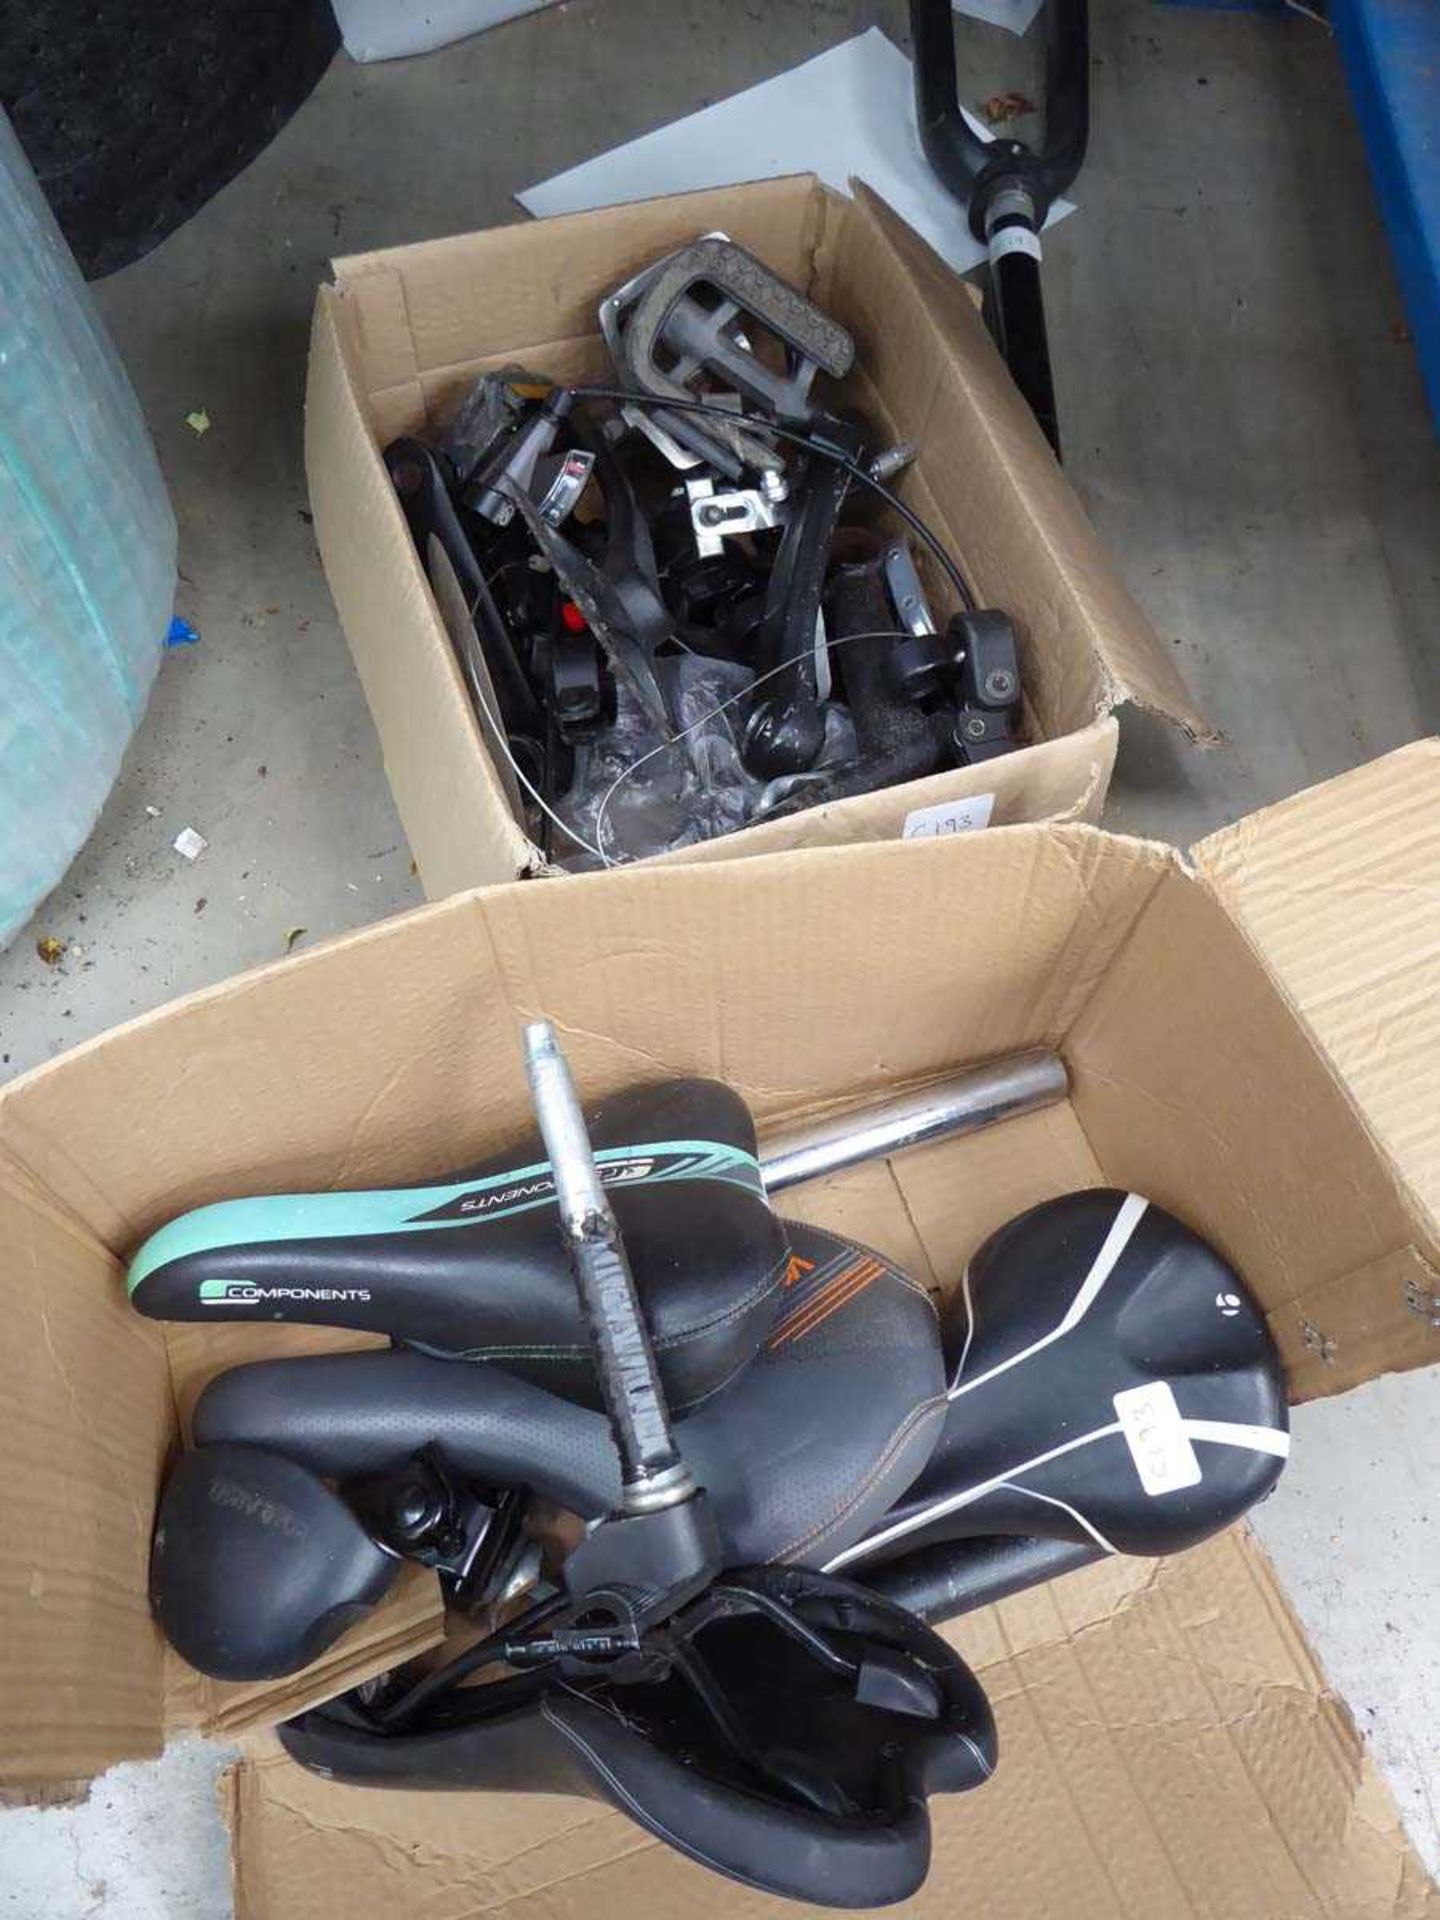 Quantity of used bike parts inc. seat, forks, pedals etc.